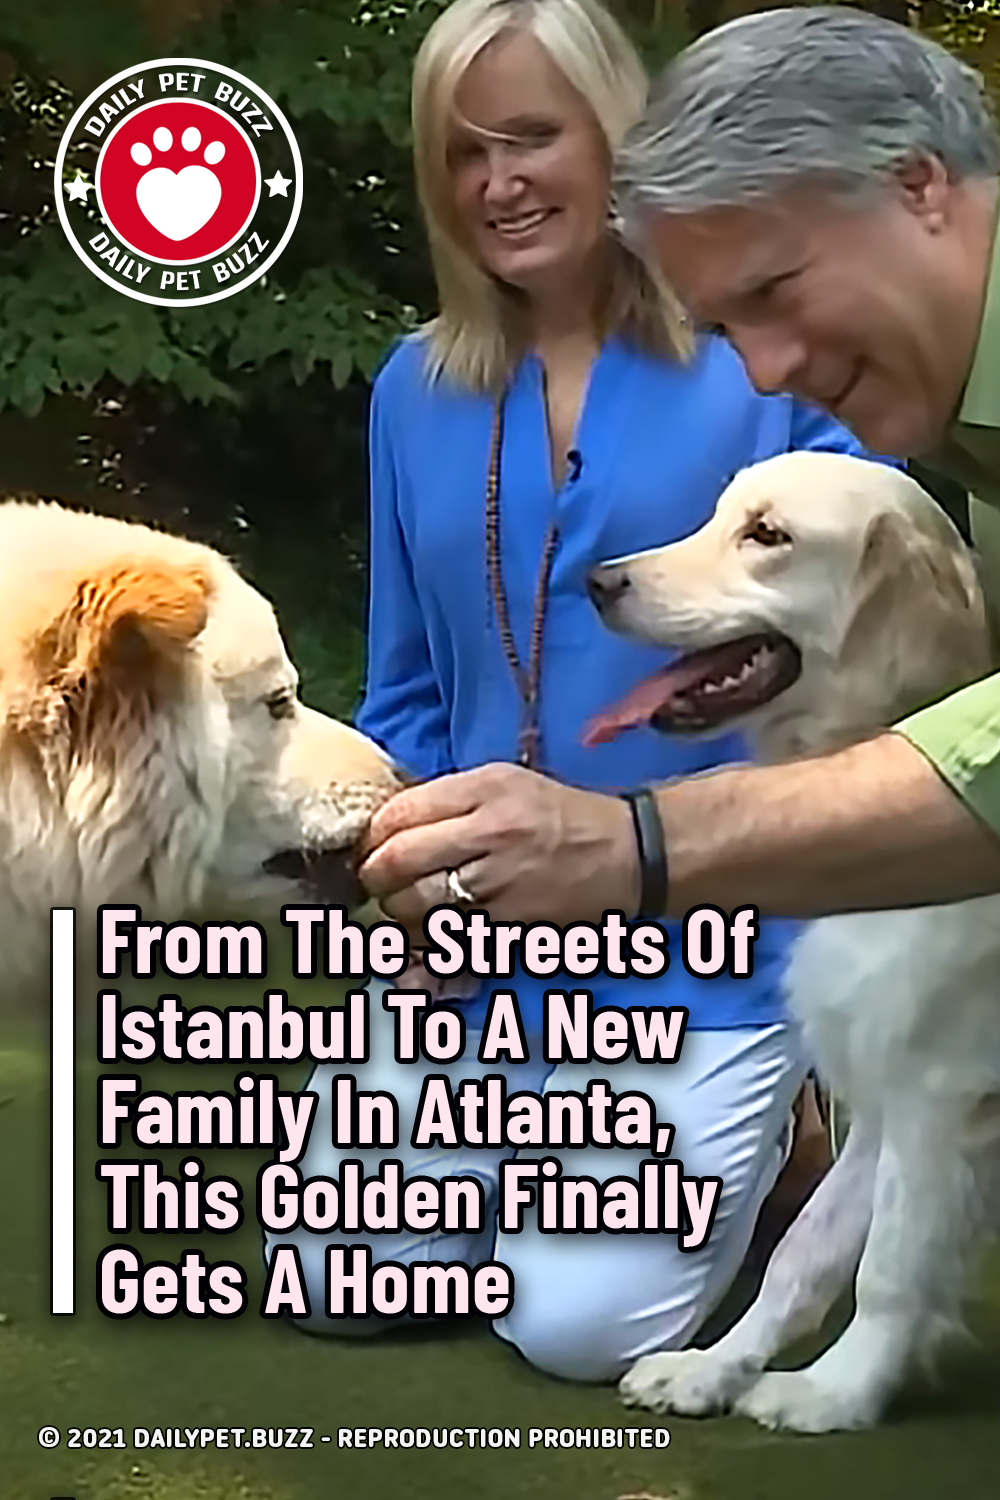 From The Streets Of Istanbul To A New Family In Atlanta, This Golden Finally Gets A Home